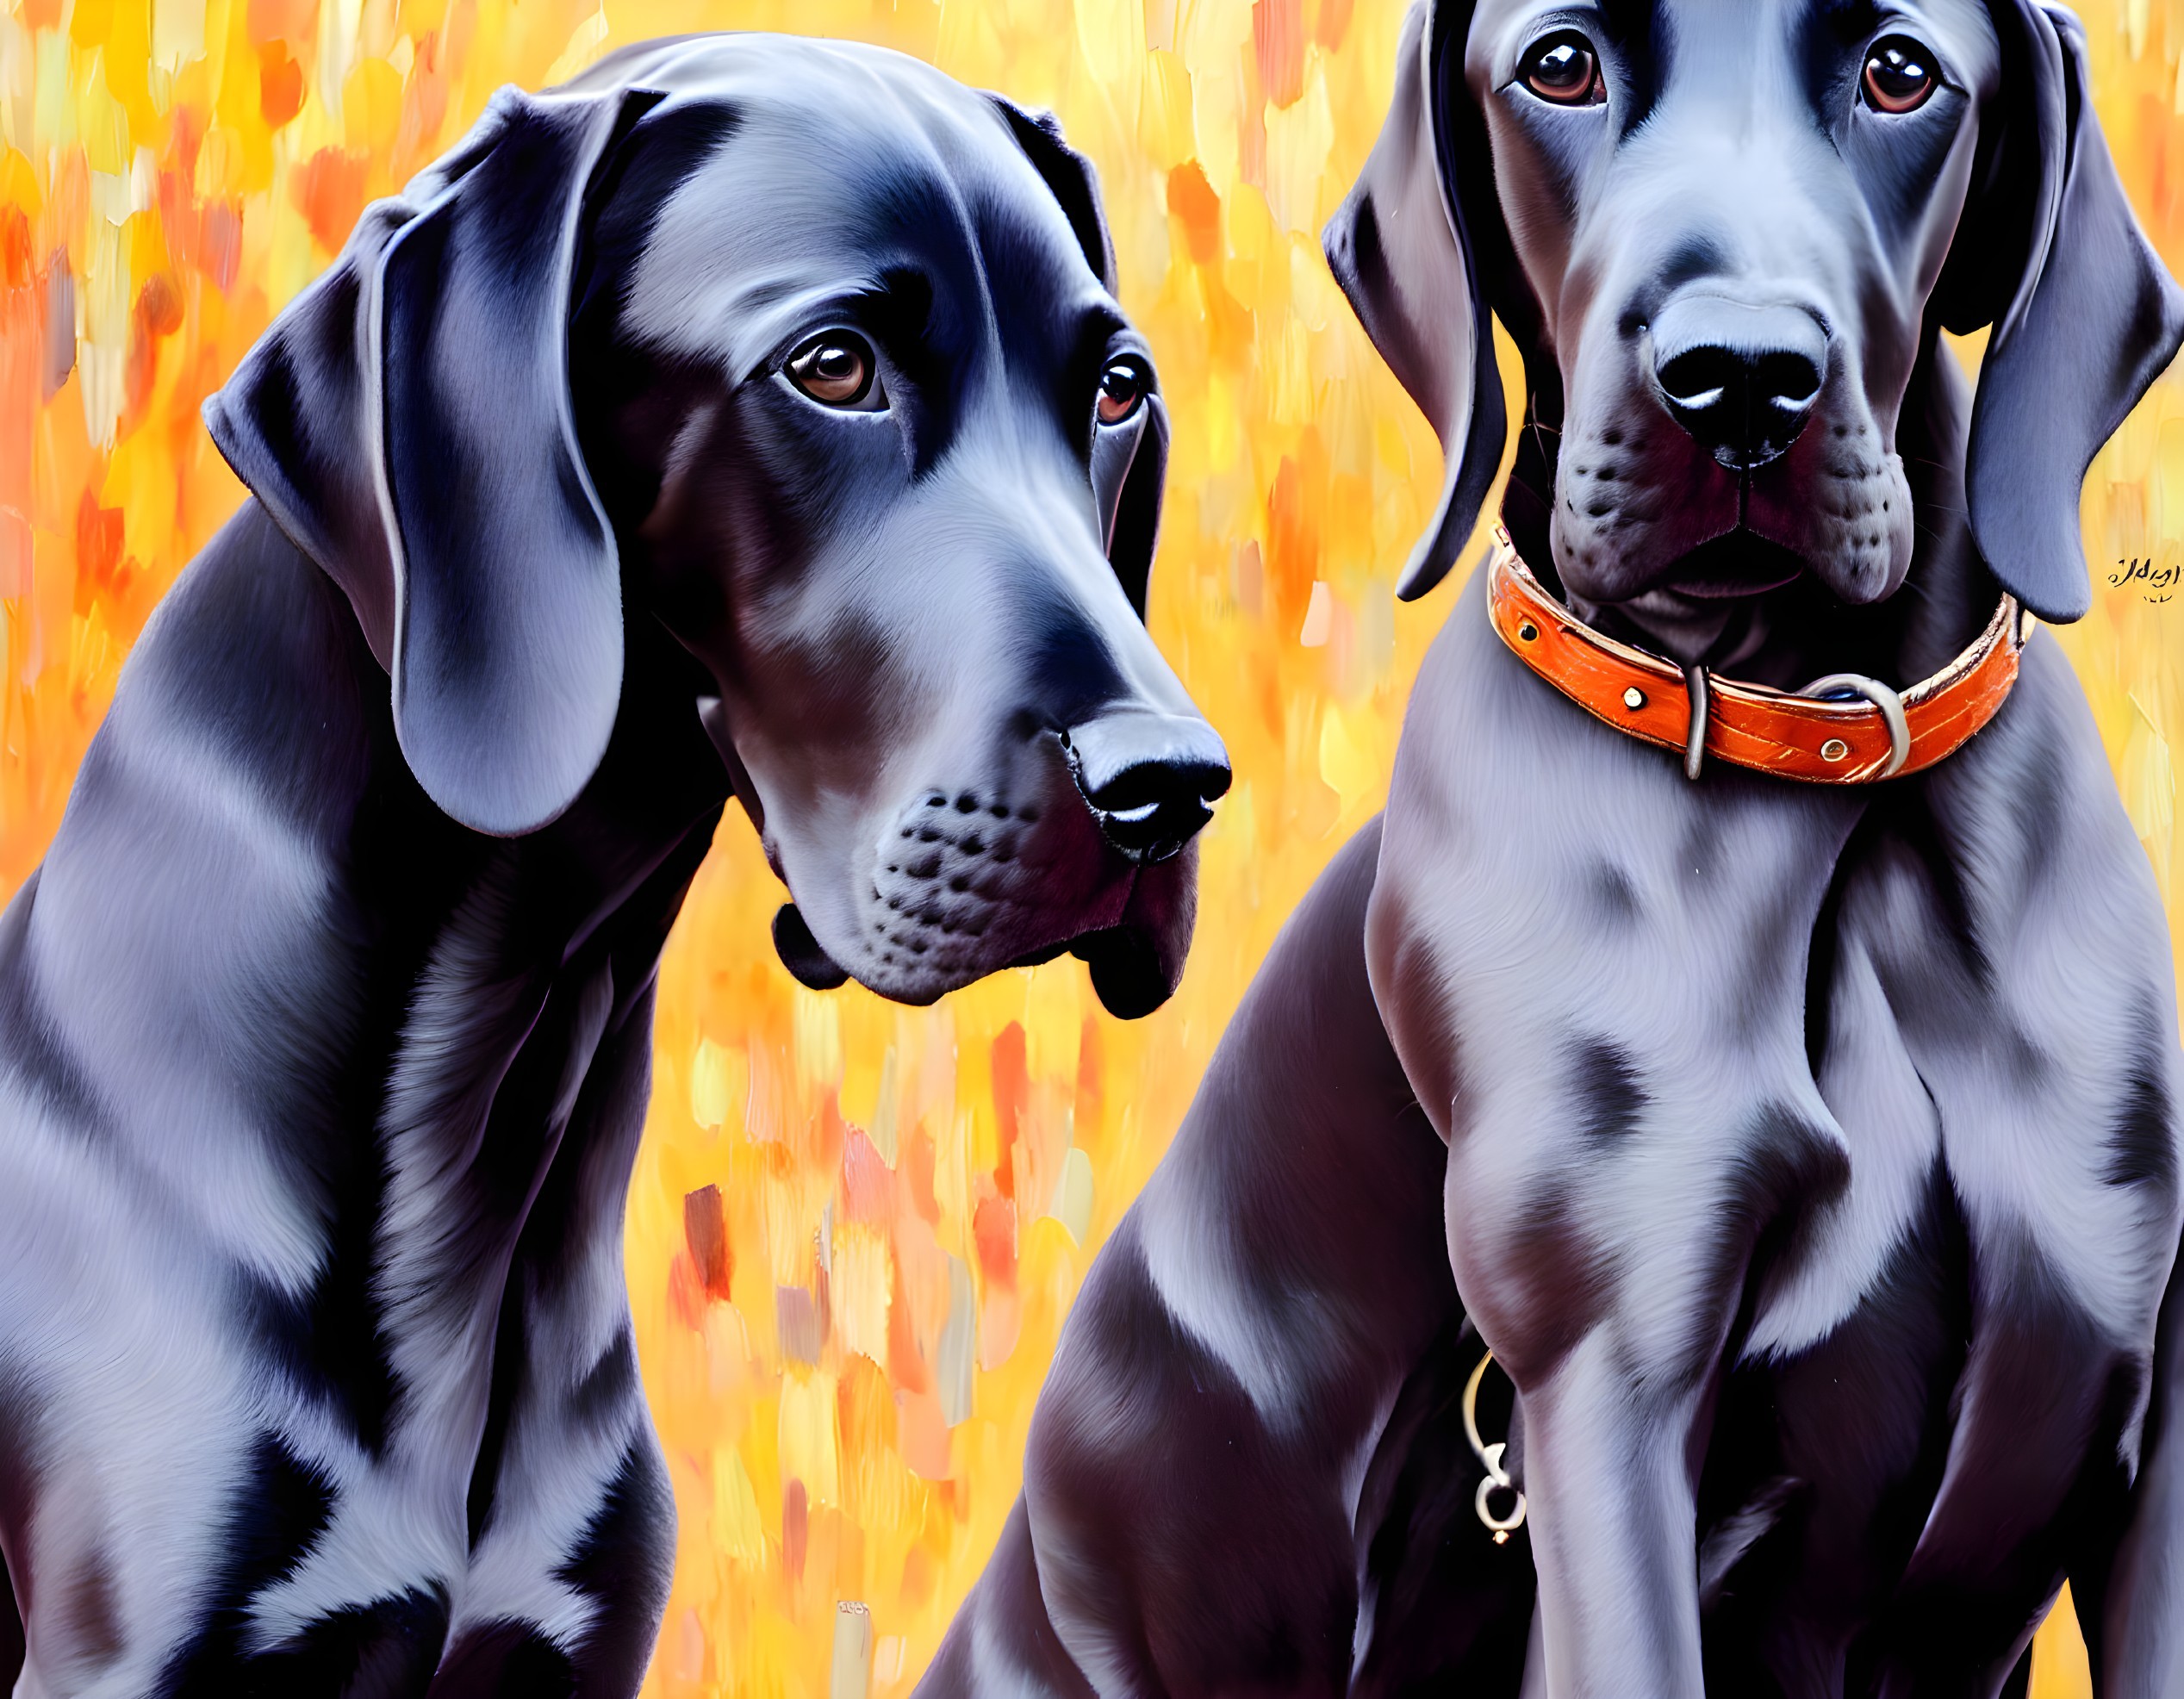 Realistic Weimaraner Dogs with Grey Coats and Orange Collars on Fiery Background